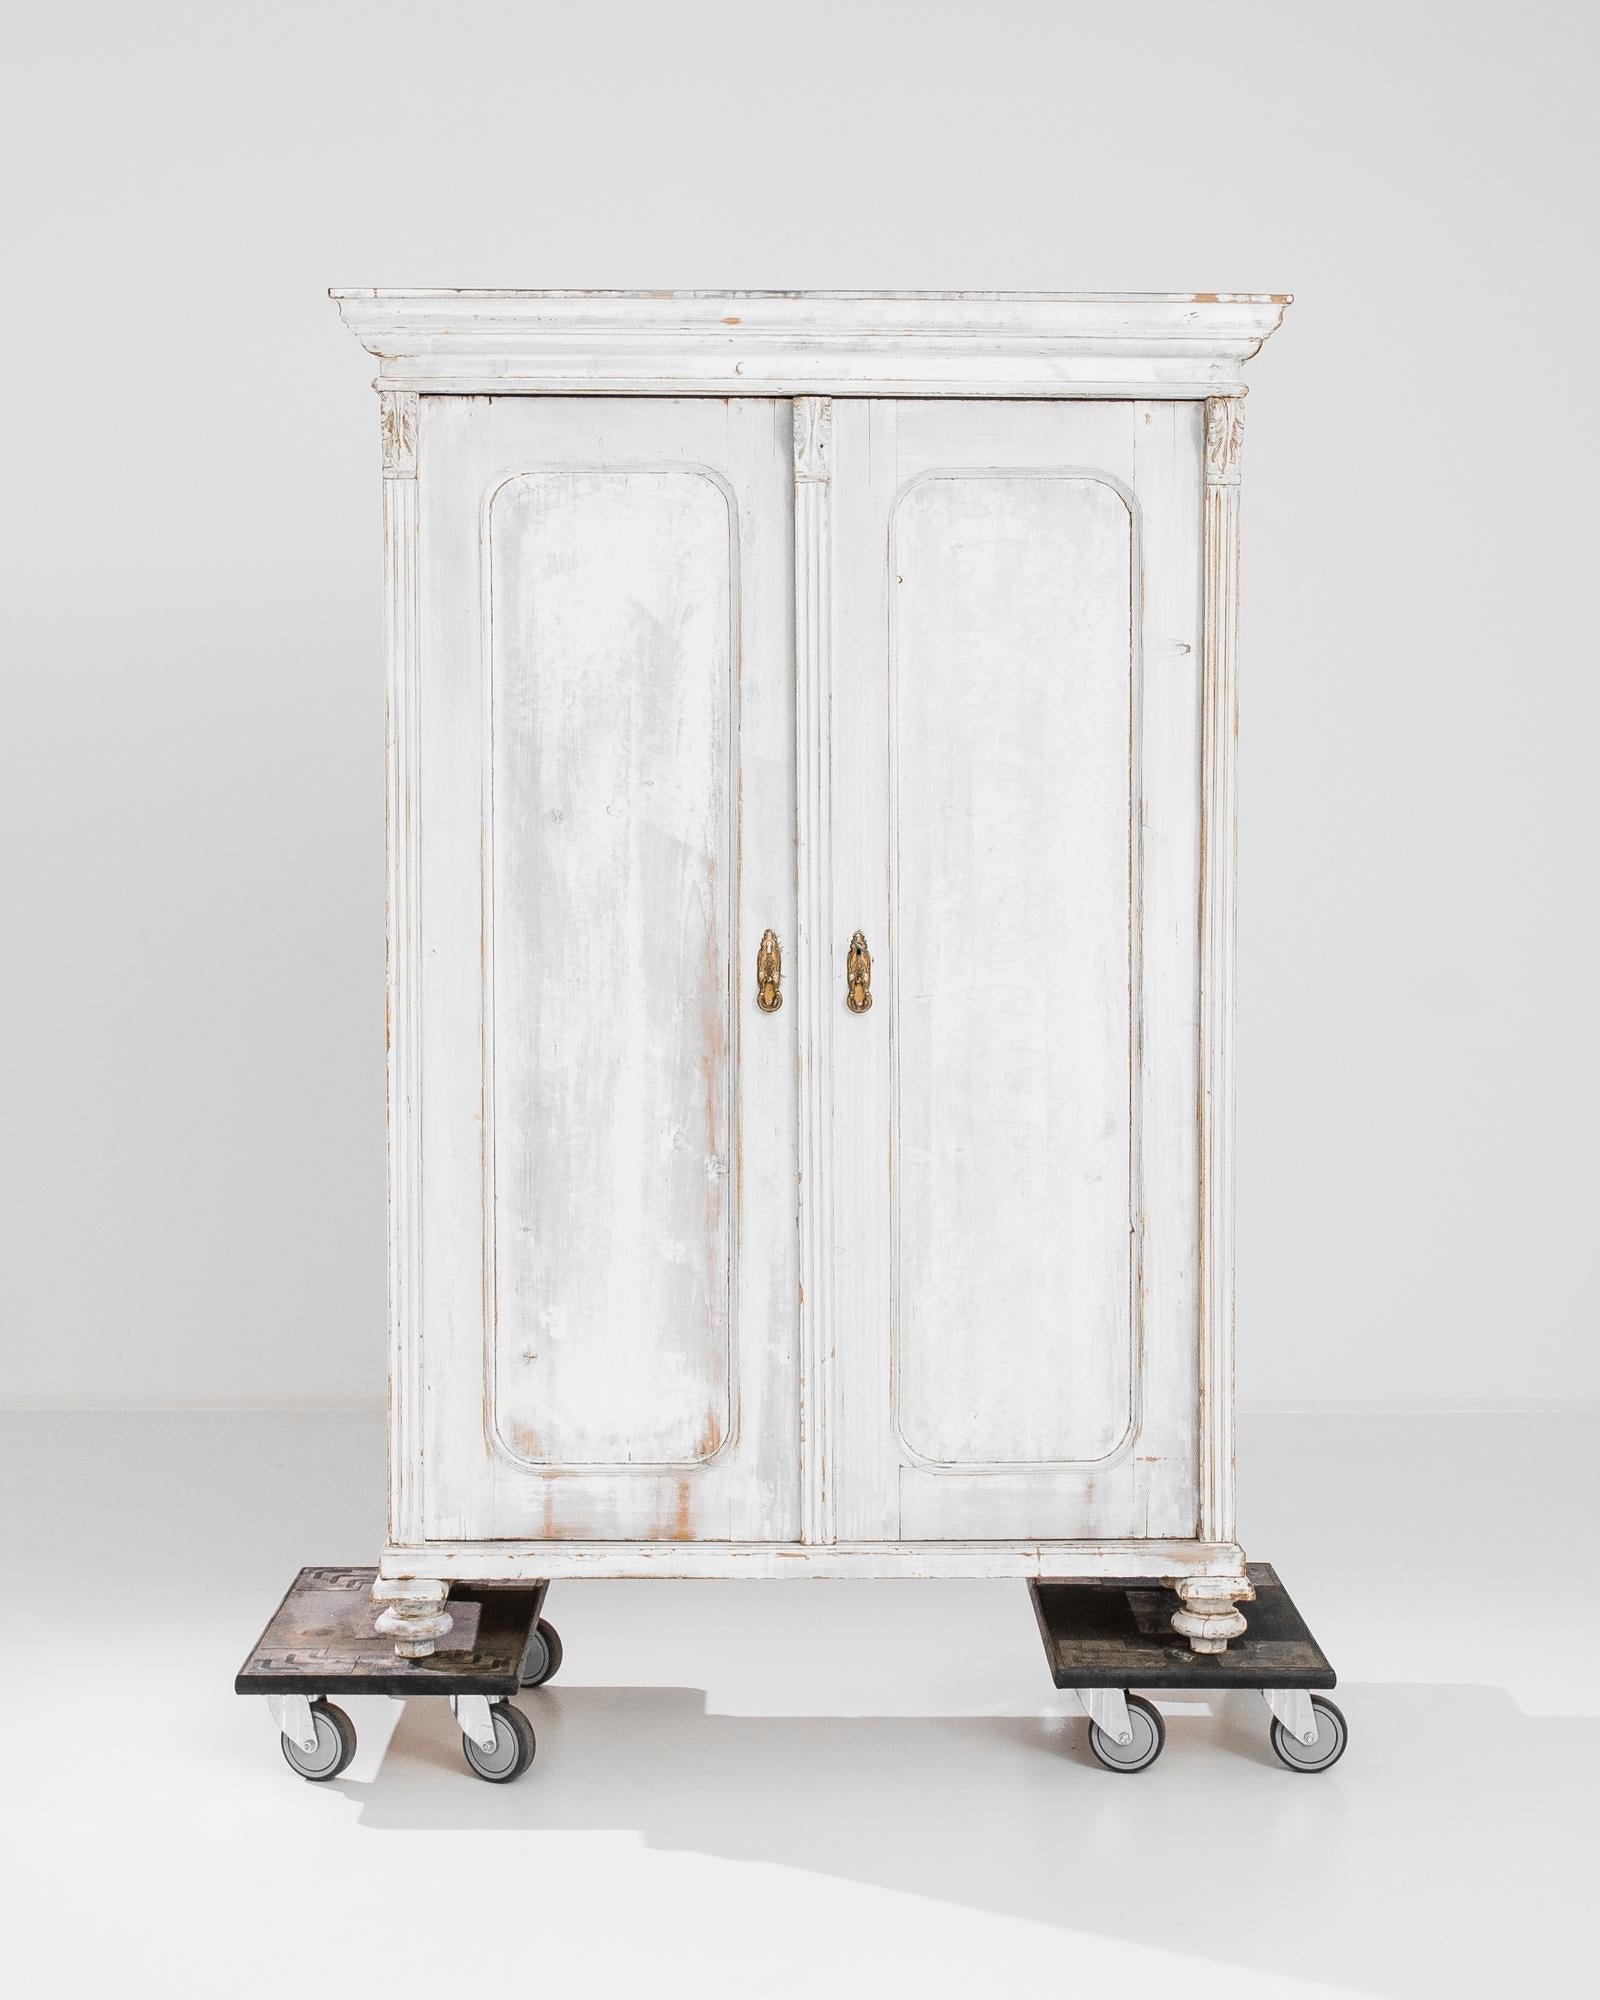 A white wooden cabinet from France, circa 1900. This handcrafted armoire stands on turned feet, guarded by a golden-brass lock. A refreshing space maker and a stylish storage. Adorned with neoclassical elements, the spacious armoire also houses an